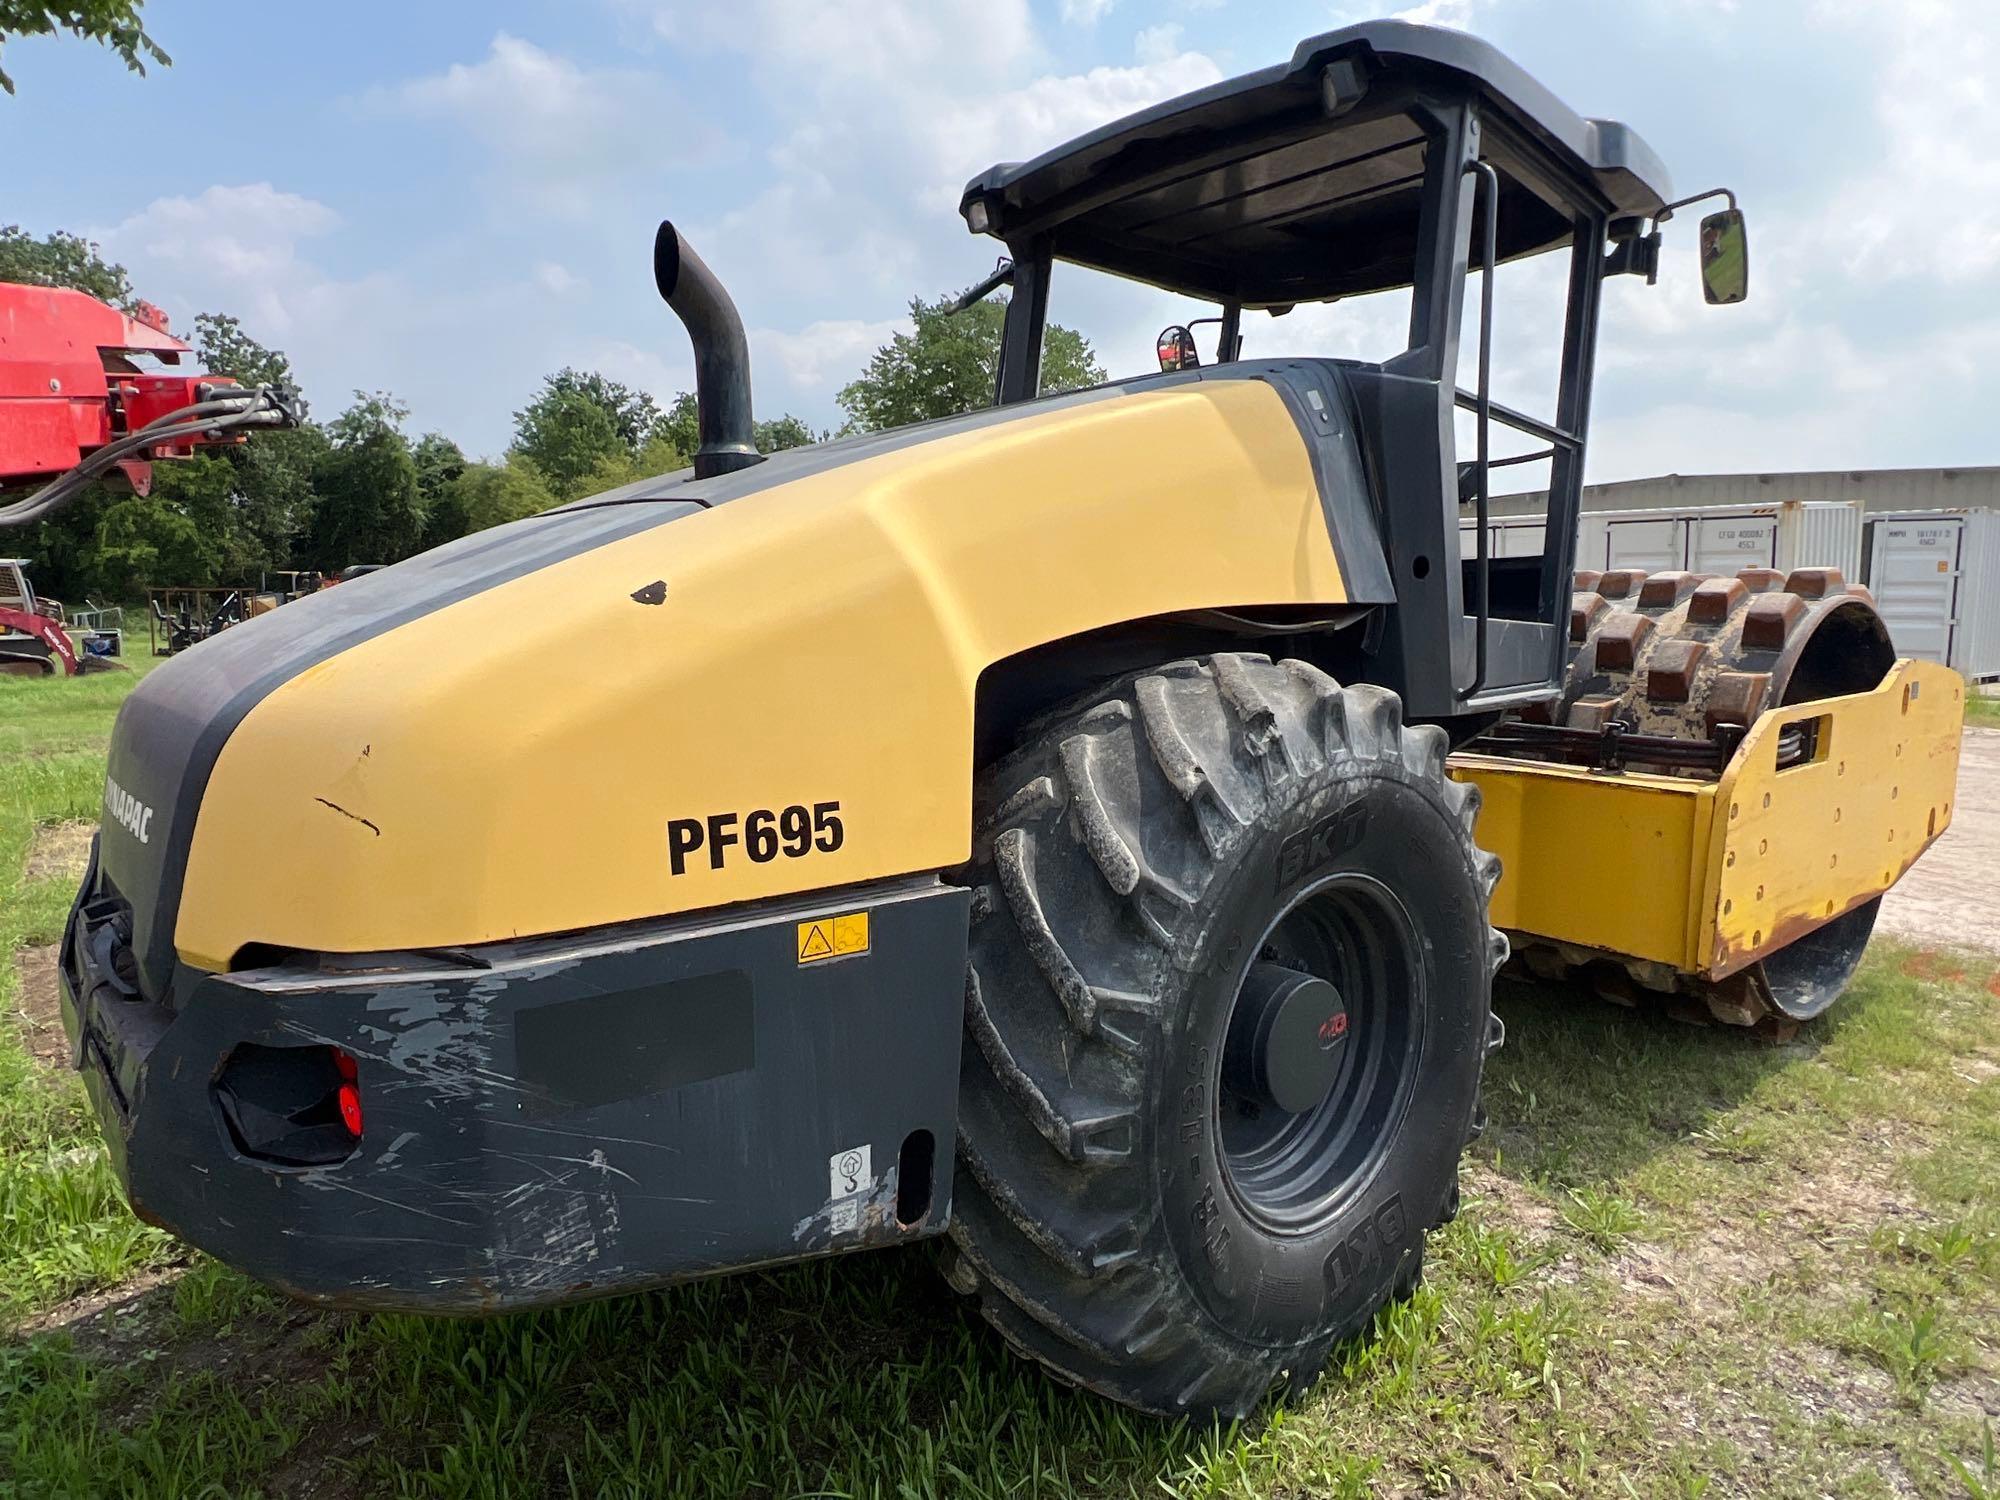 2014 DYNAPAC CA2500PD VIBRATORY ROLLER SN:13837 powered by Cummins diesel engine, equipped with